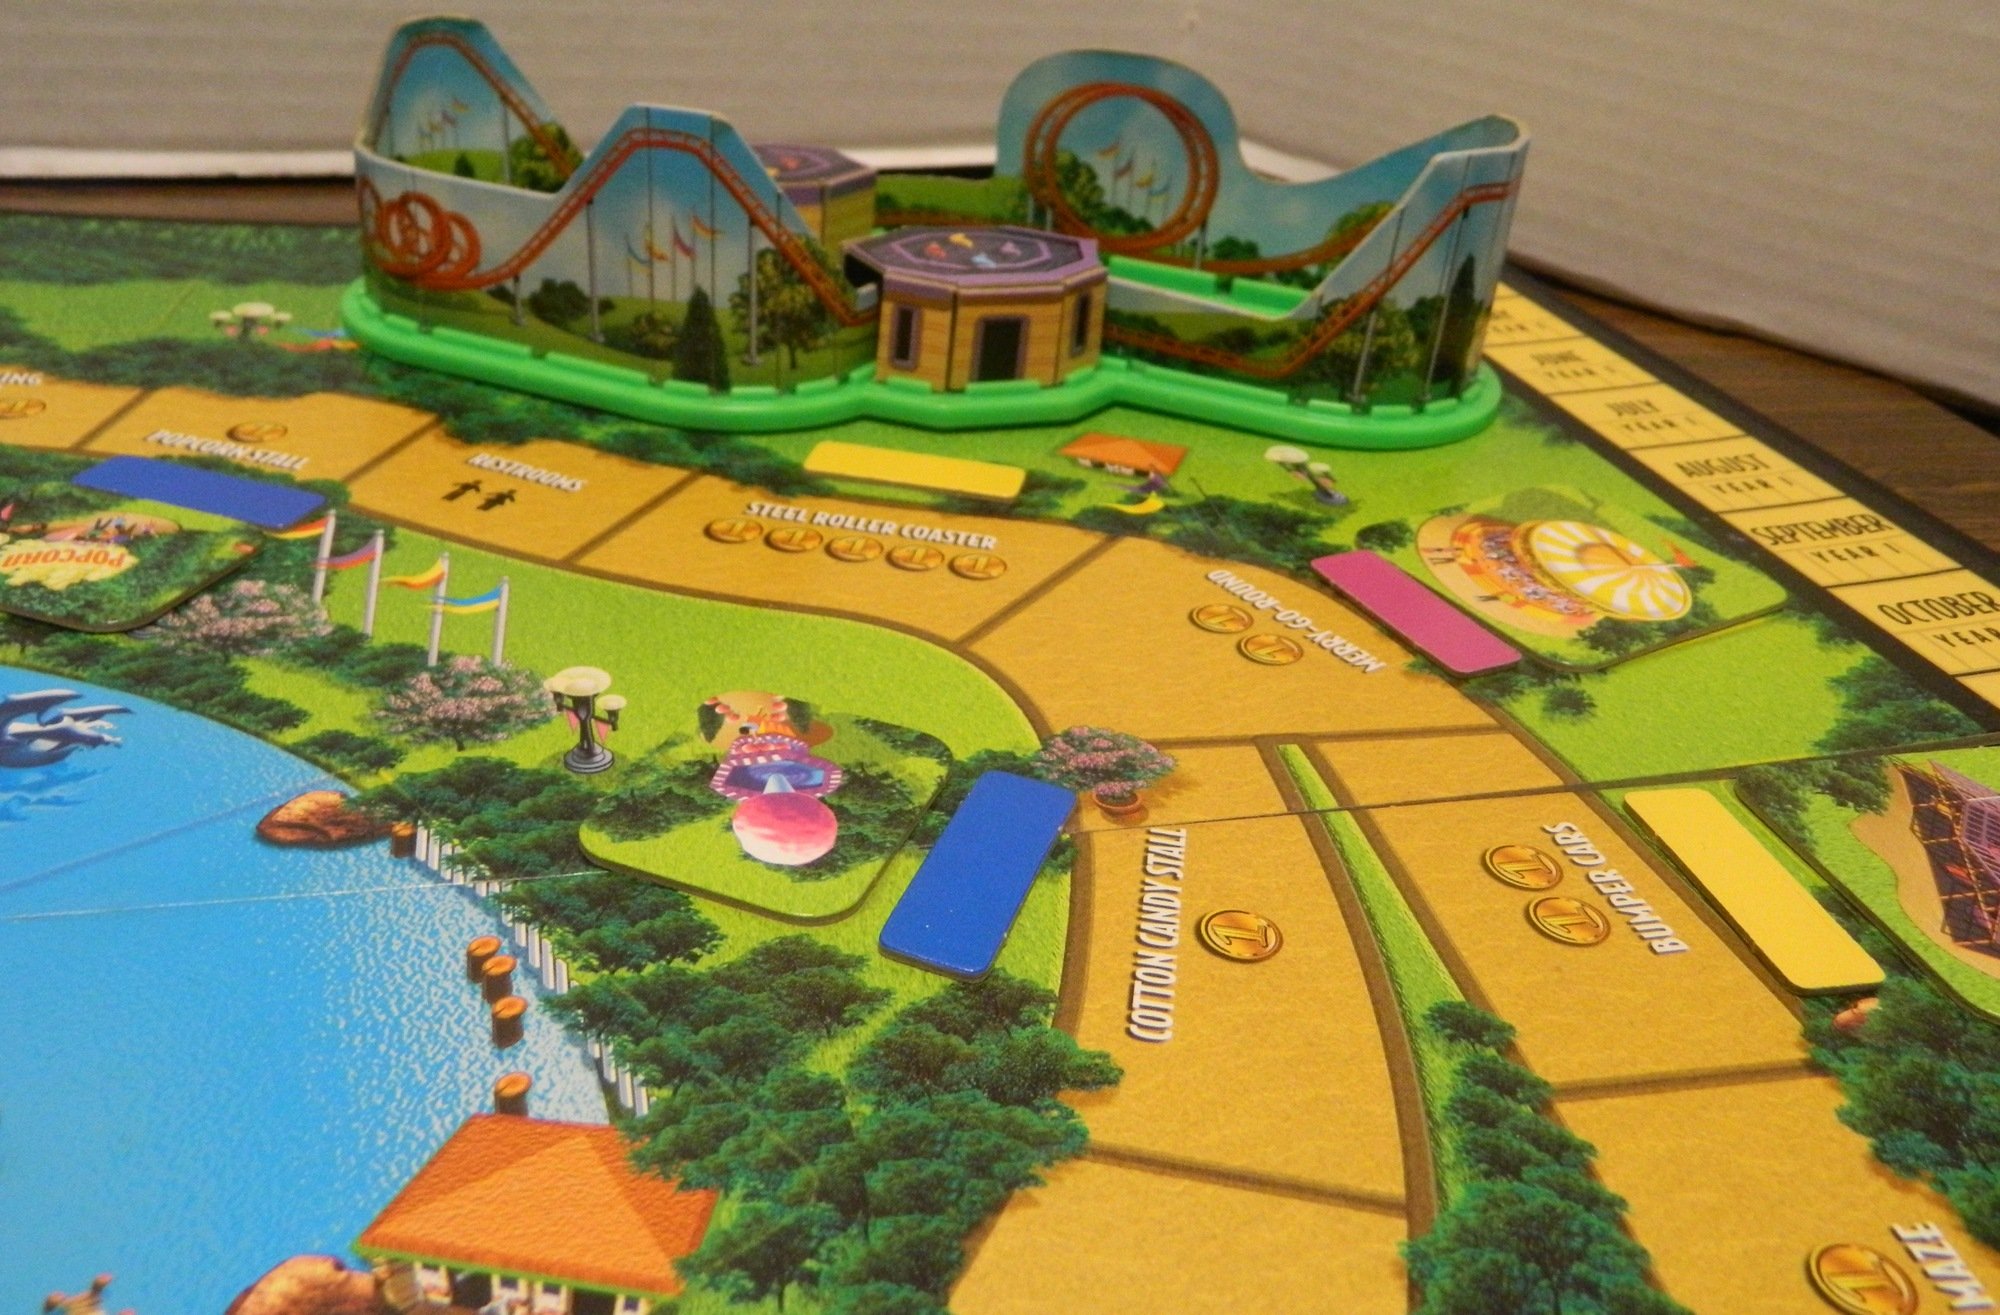 Roller Coaster Tycoon Board Game Review and Rules - Geeky Hobbies